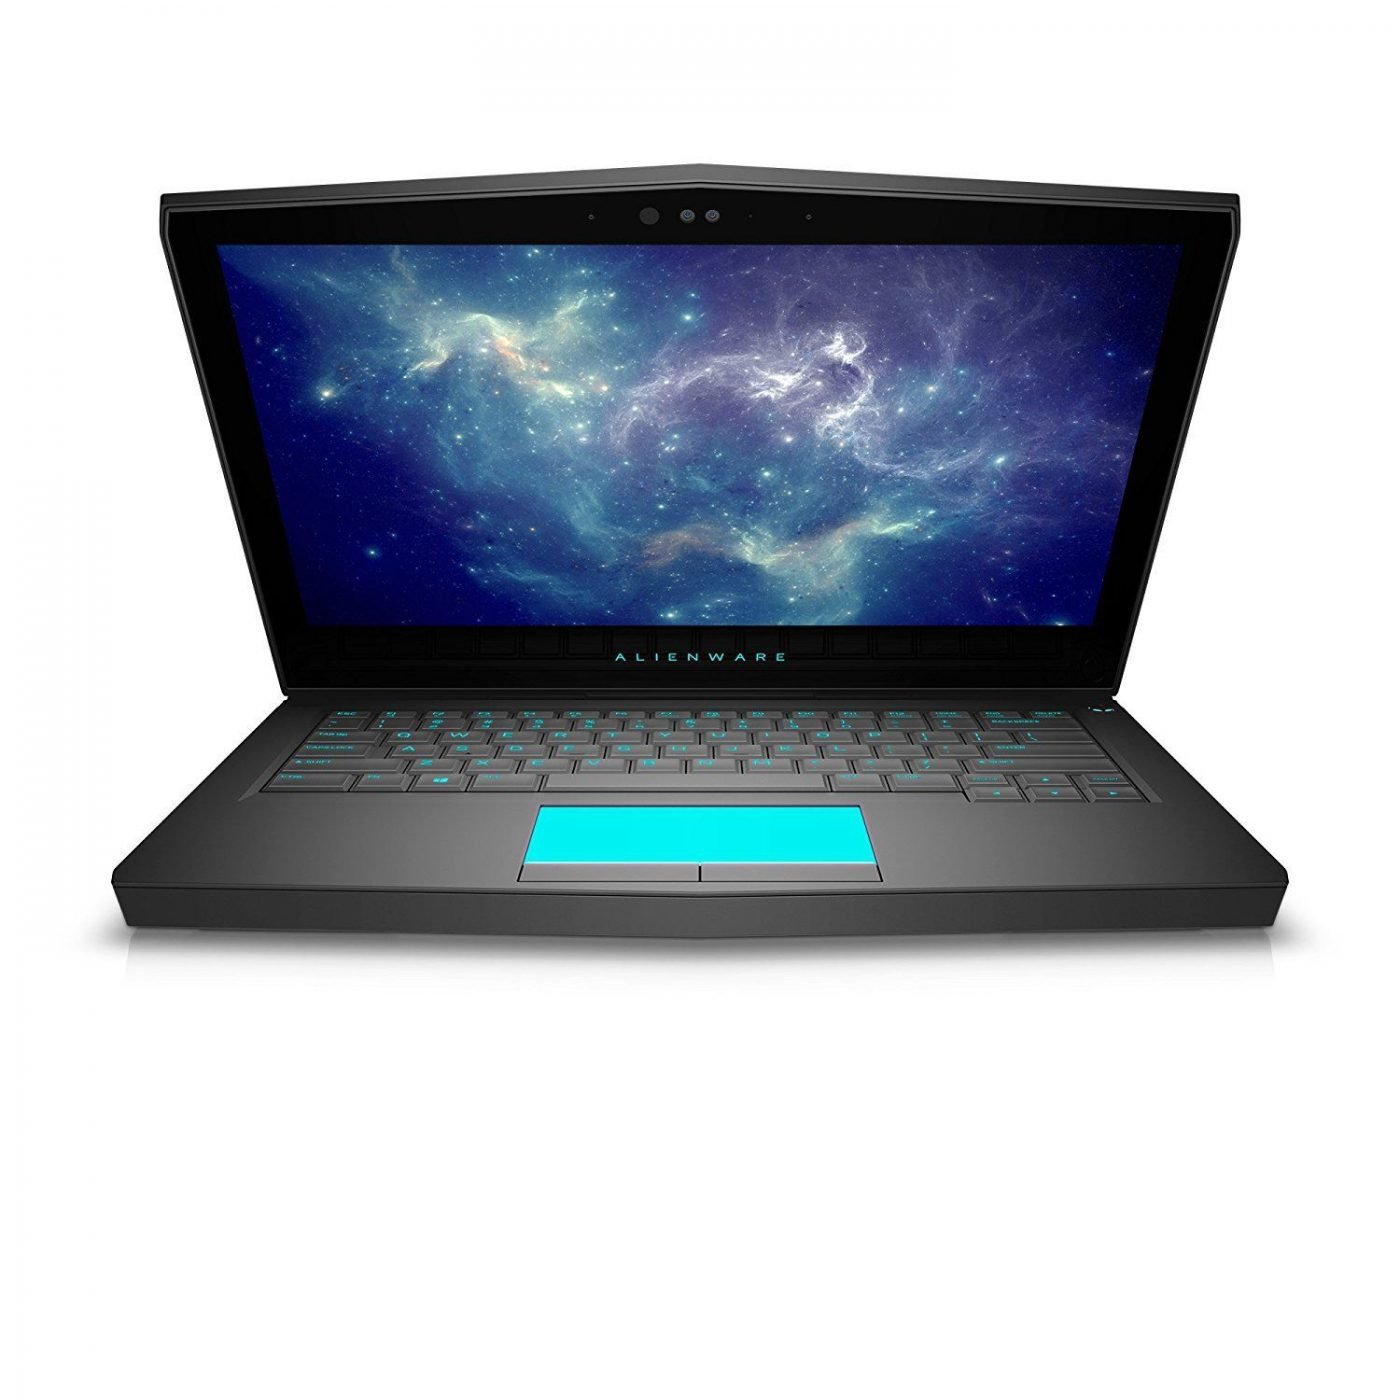 Alienware 13 R3 Intel Core i5-7300HQ up to 3.5GHz 8GB RAM 256GB 